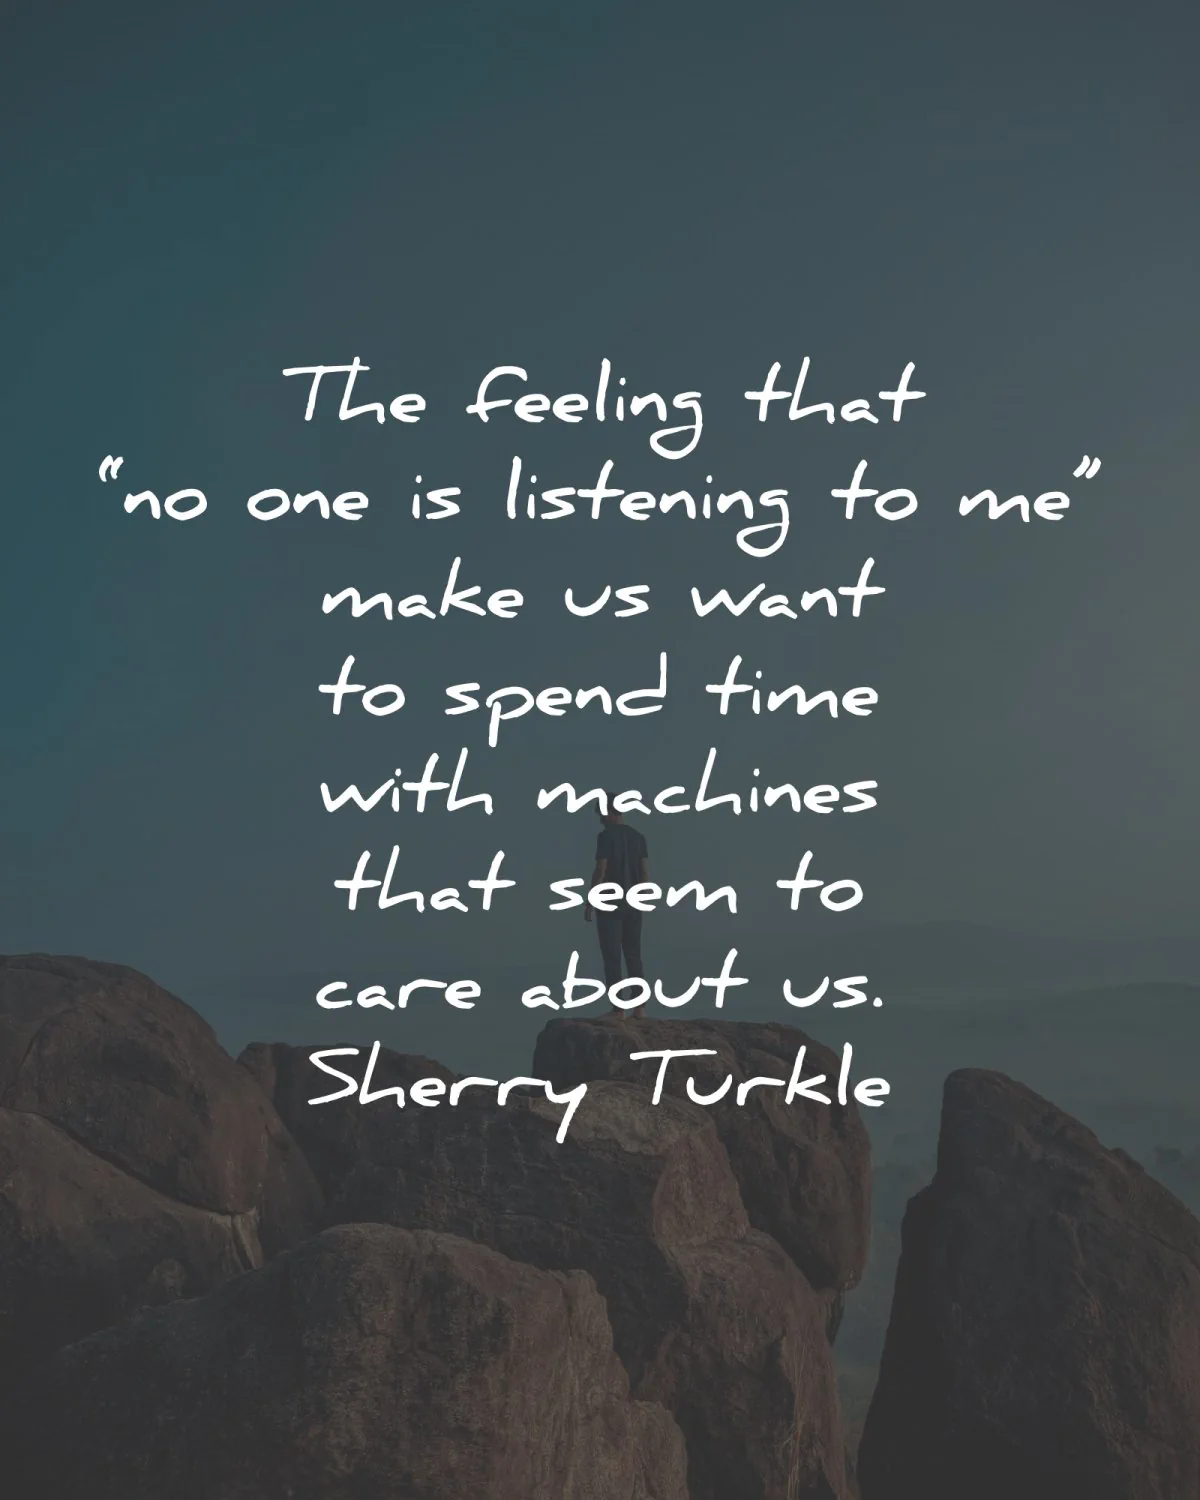 addiction social media quotes feeling make want spend time sherry turkle wisdom